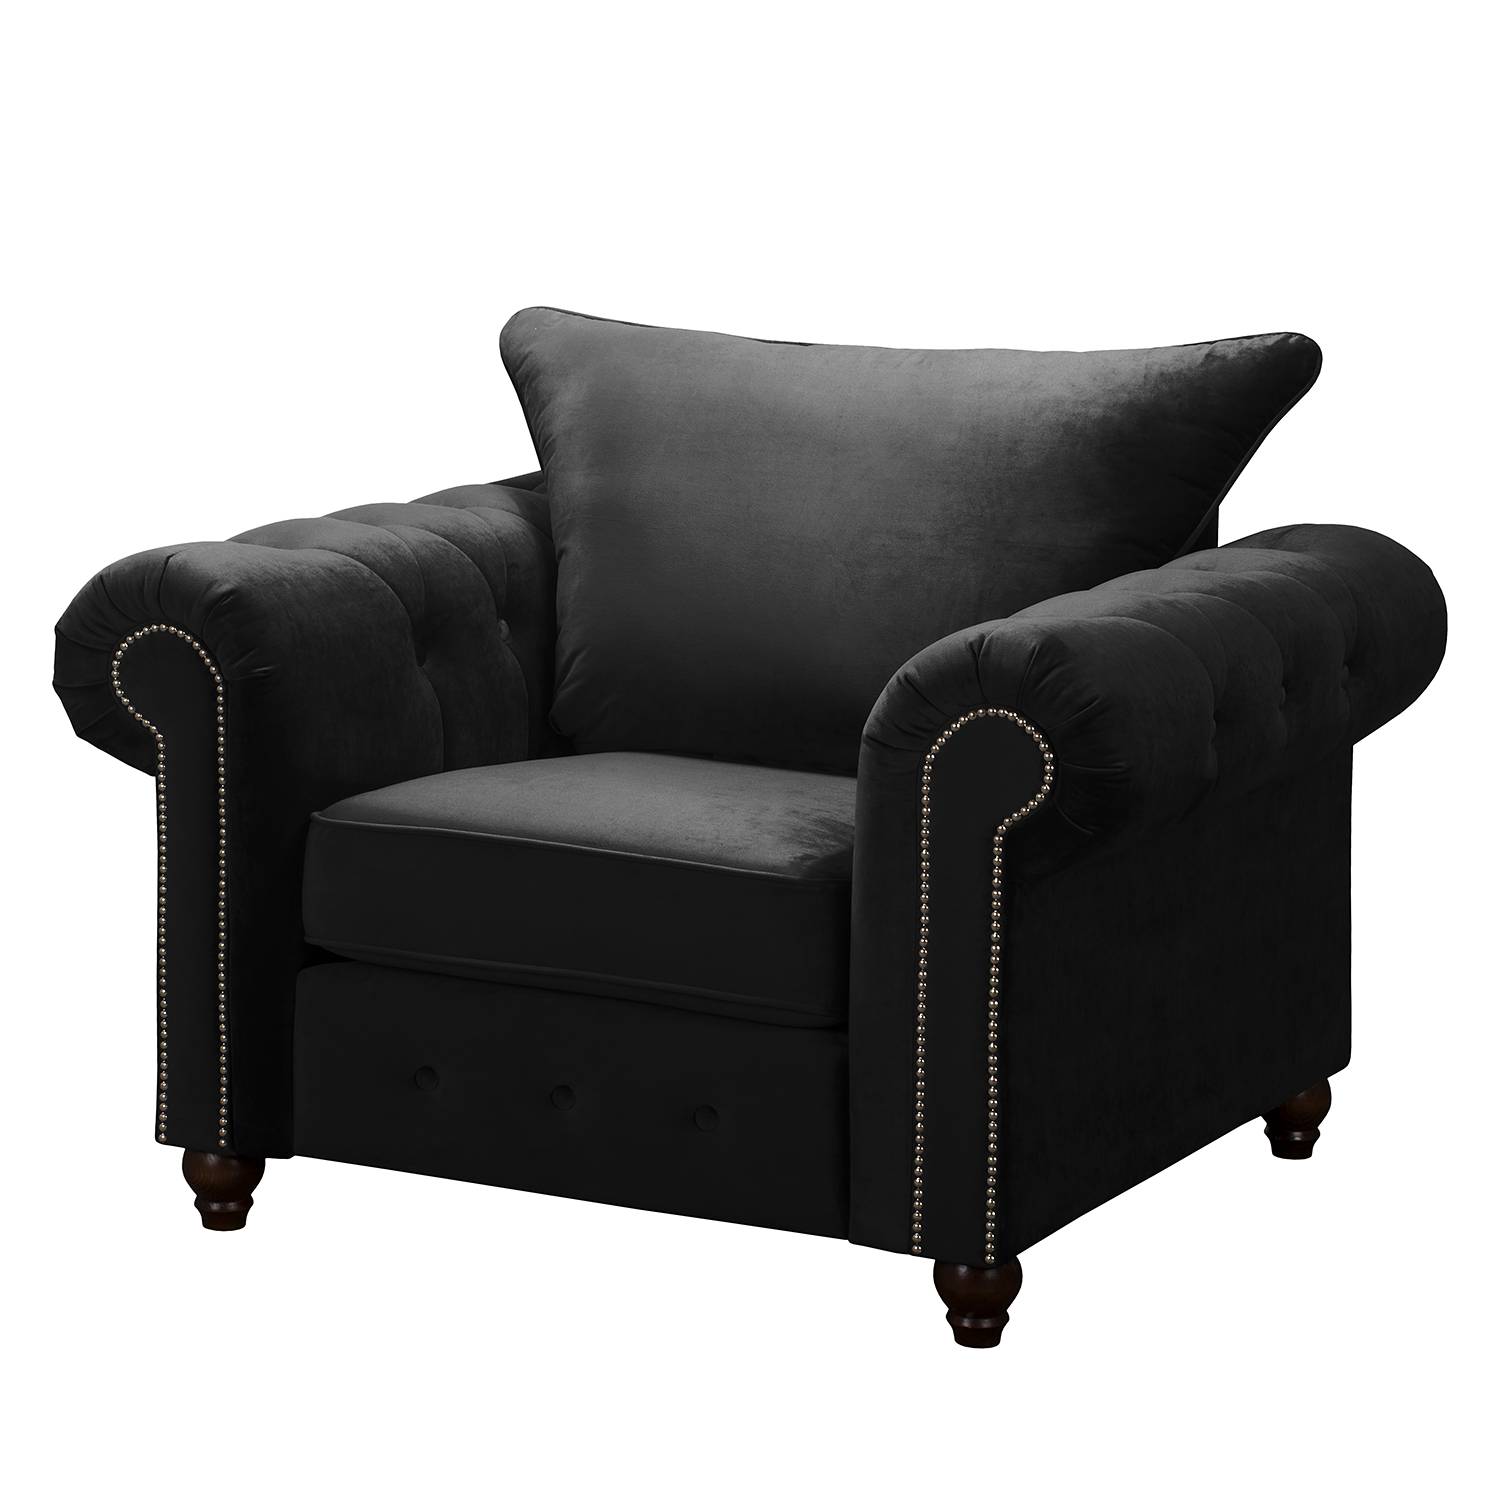 Image of Fauteuil Solita 000000001000135642